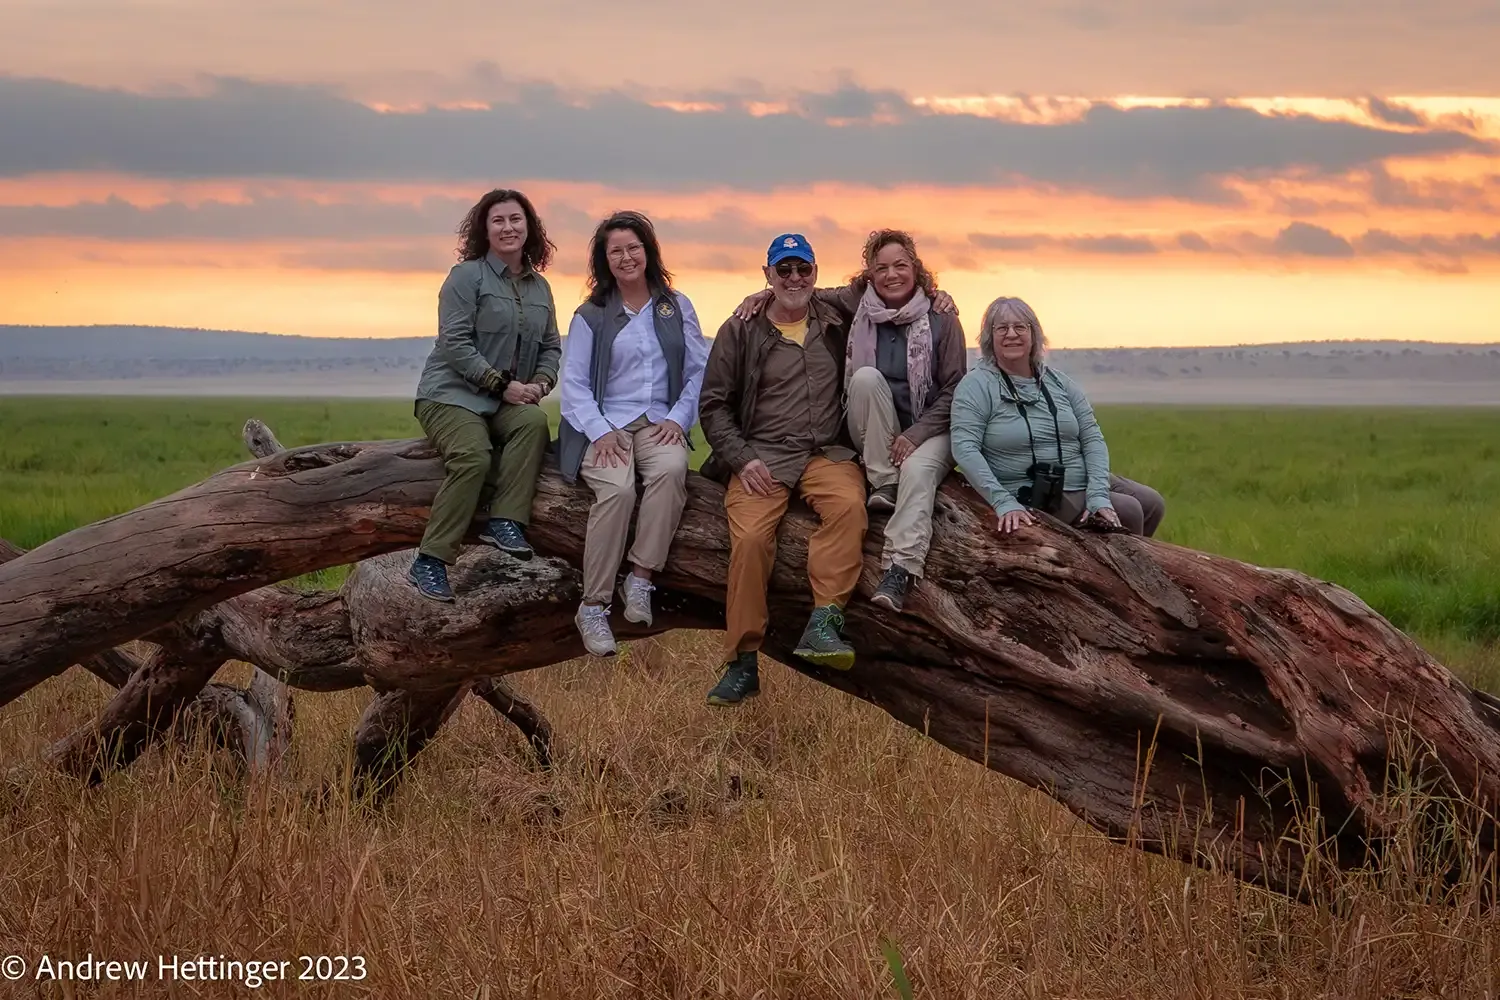 The group sitting on a tree trunk with a sunset in the back 